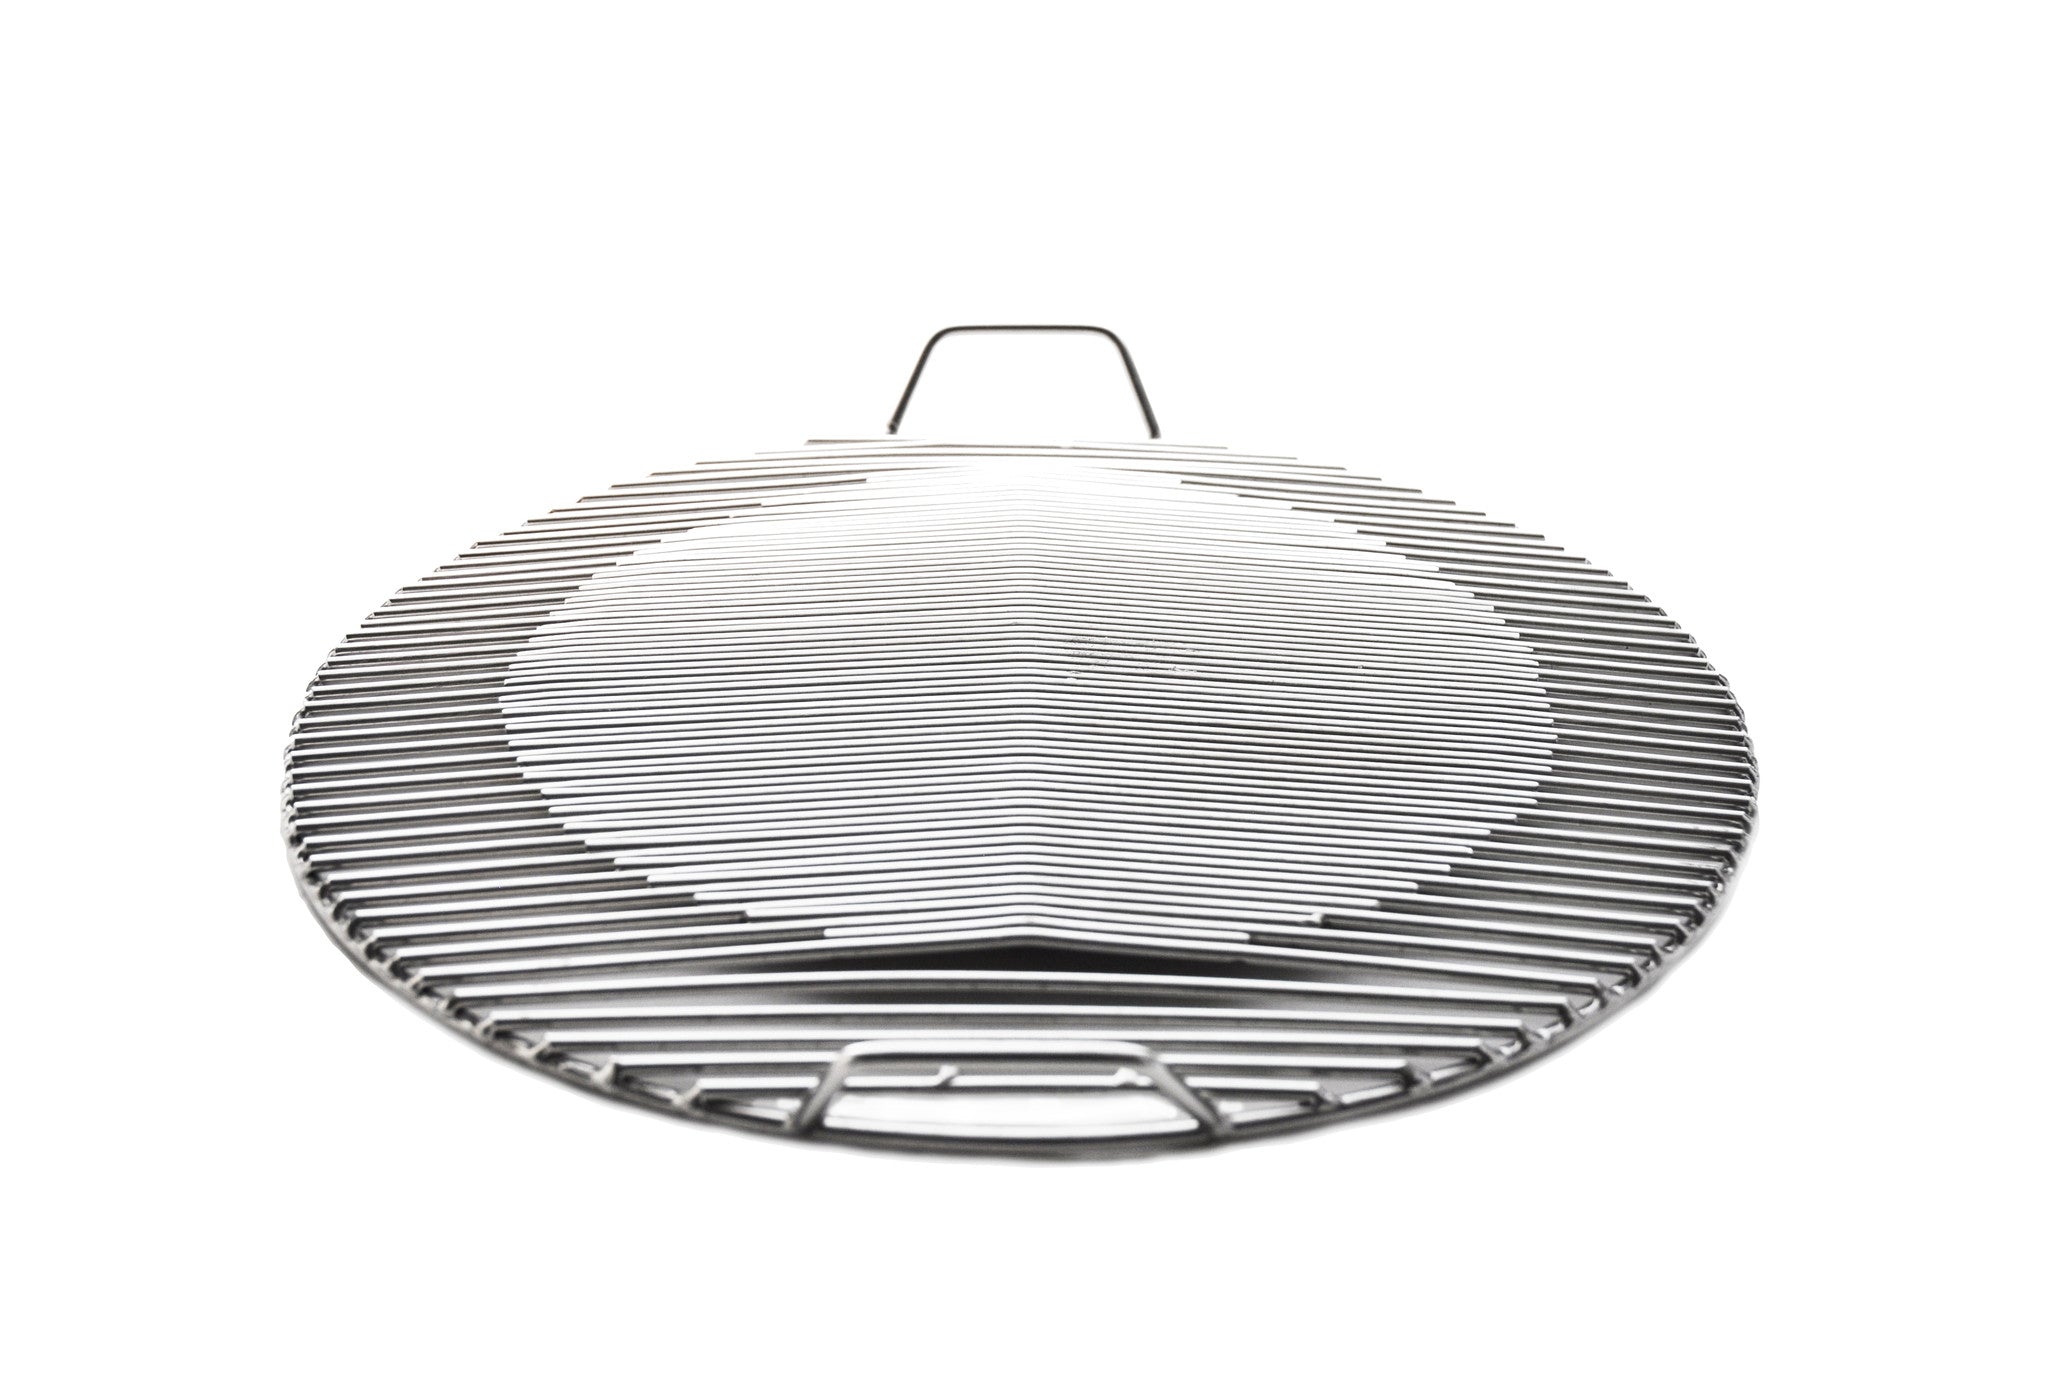 Stainless Steel Korean Bbq Grate with Handles, Stainless Steel - eKitchenary